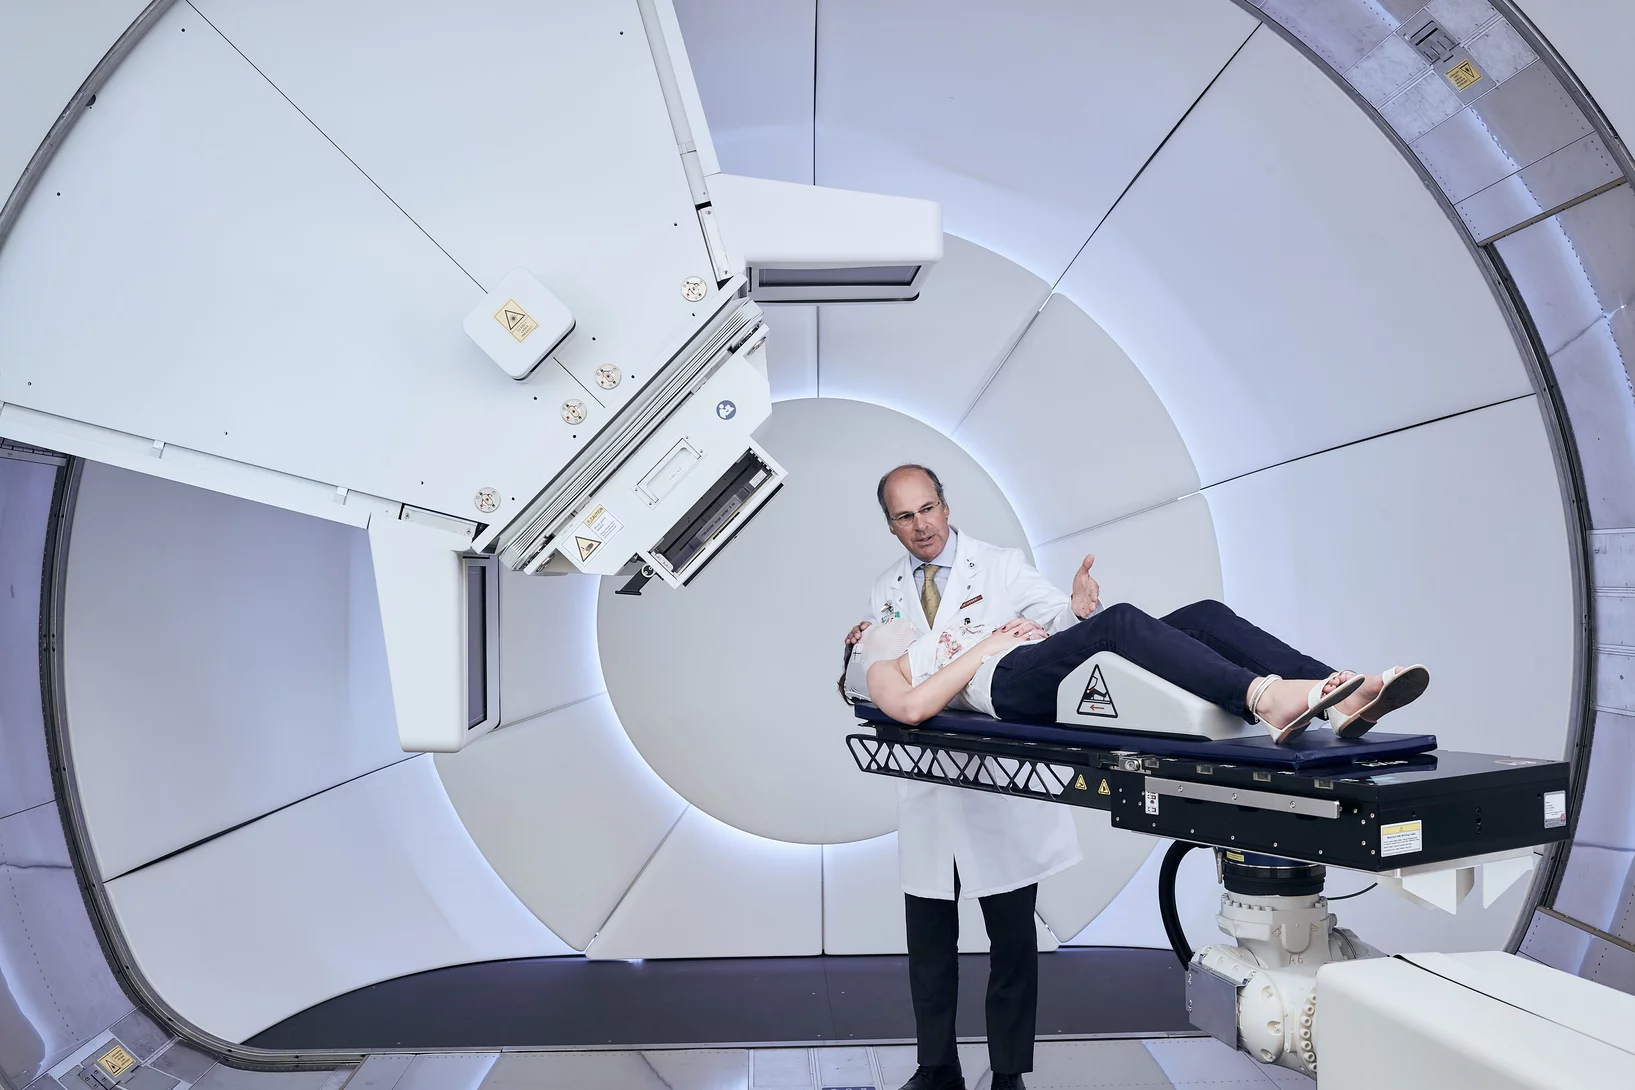 Gantry 3 – the new treatment unit for proton therapy at PSI. A staff member of PSI demonstrates the patient positioning. Standing: Prof. Damien Weber, head of the Centre for Proton Therapy at the Paul Scherrer Institute. (Photo: Scanderbeg Sauer Photography)